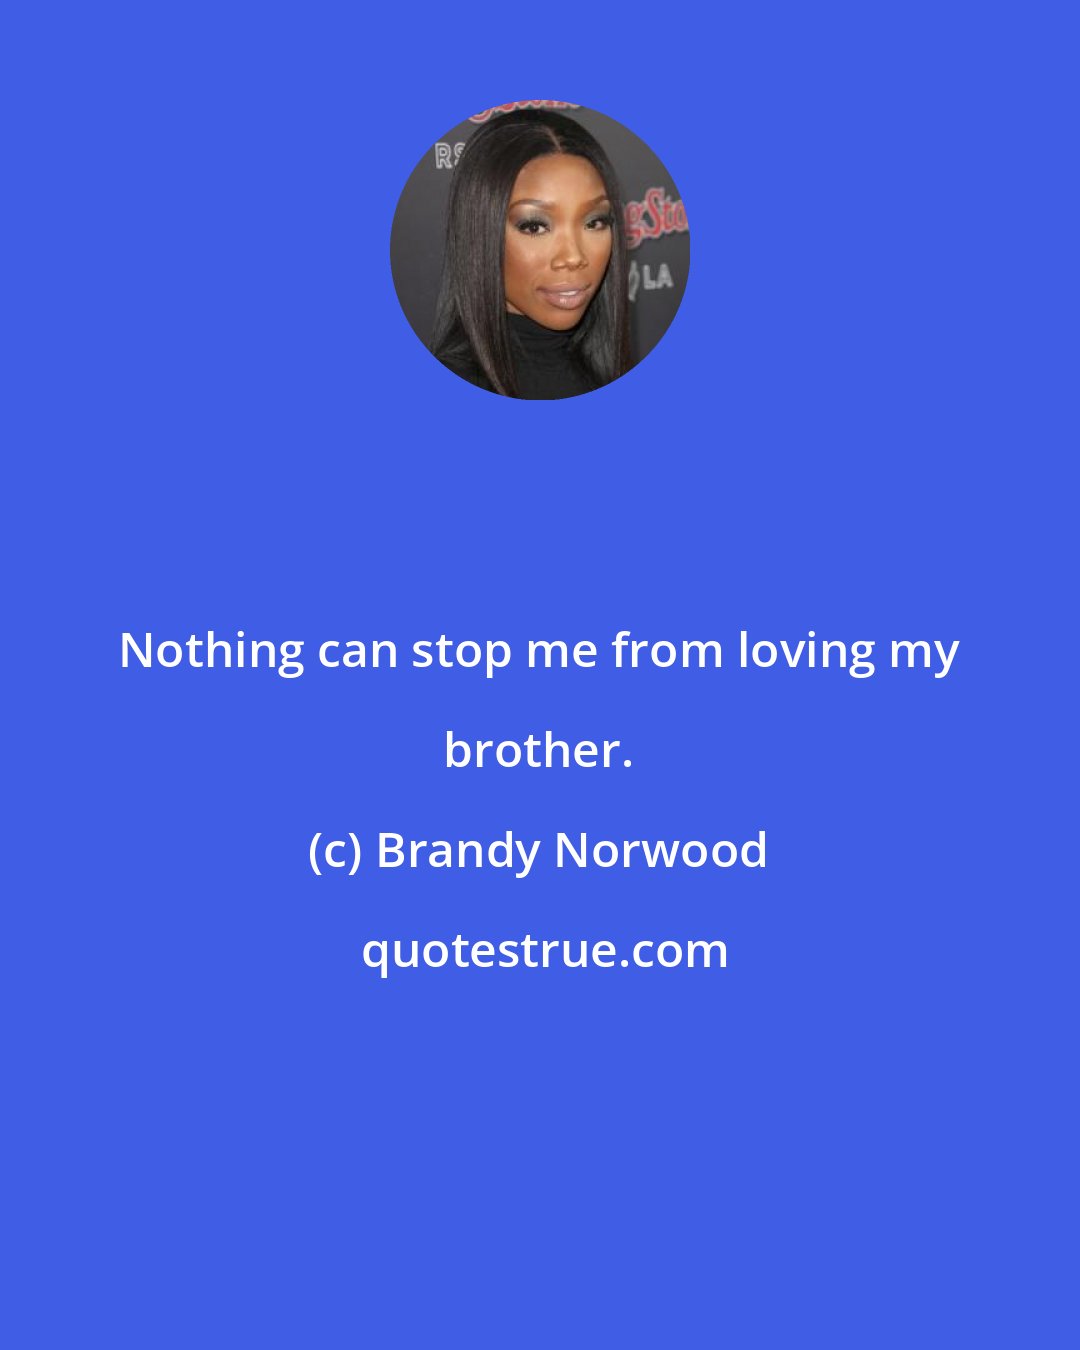 Brandy Norwood: Nothing can stop me from loving my brother.